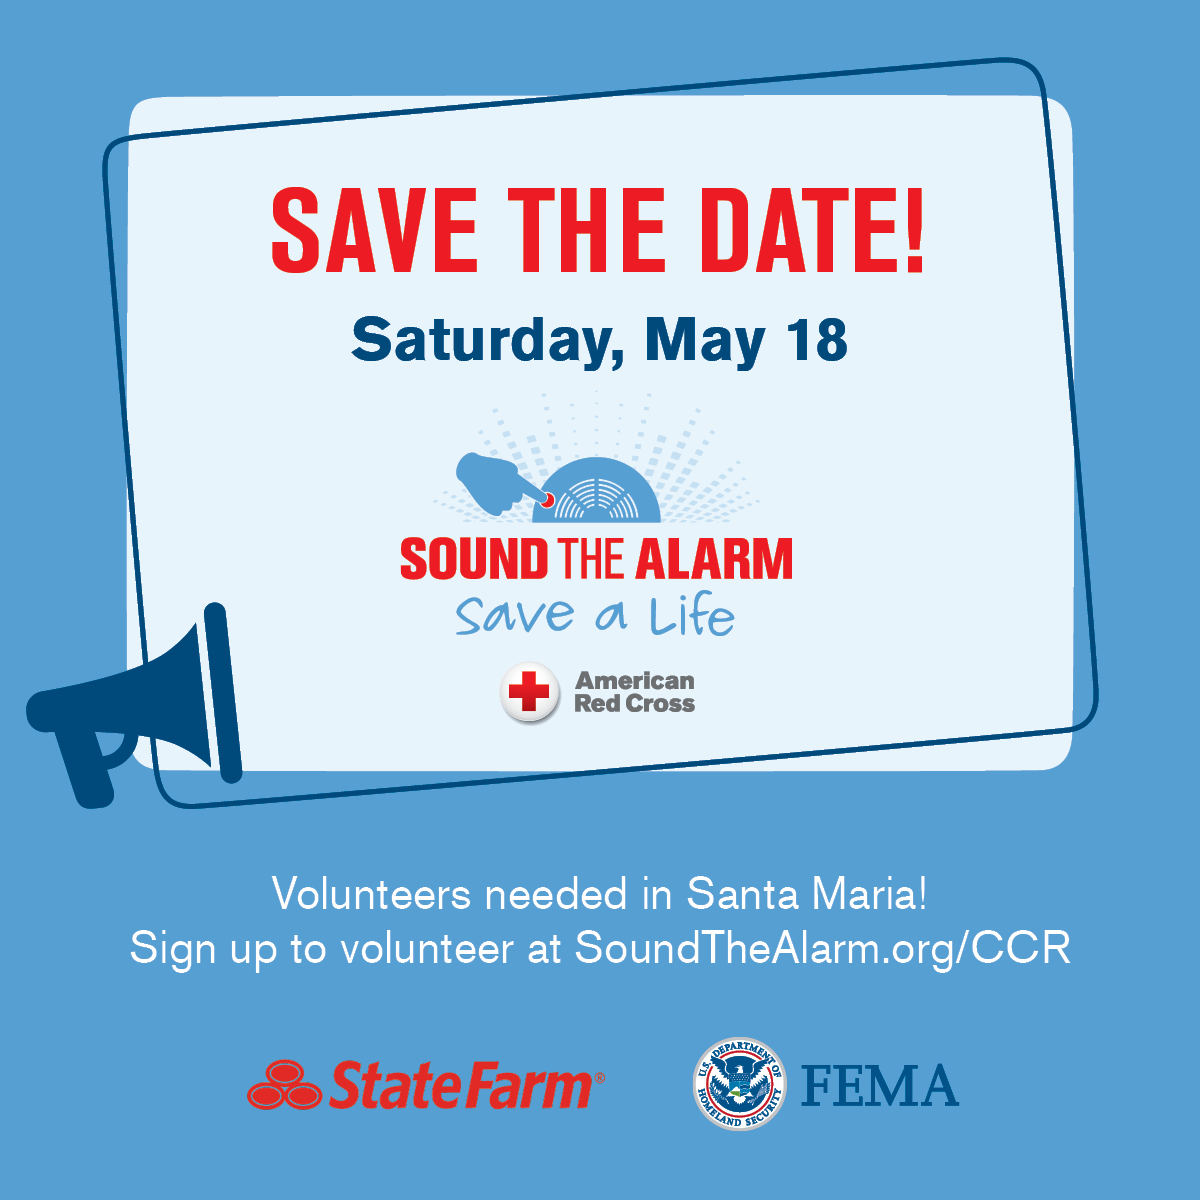 👉 YOU 👈 can help make a difference in the lives of our neighbors by spending a Saturday morning with us helping install free smoke alarms & providing fire safety info in Santa Maria neighborhoods.

Join us to help #EndHomeFires on May 18 ➡️ SoundTheAlarm.org/CCR